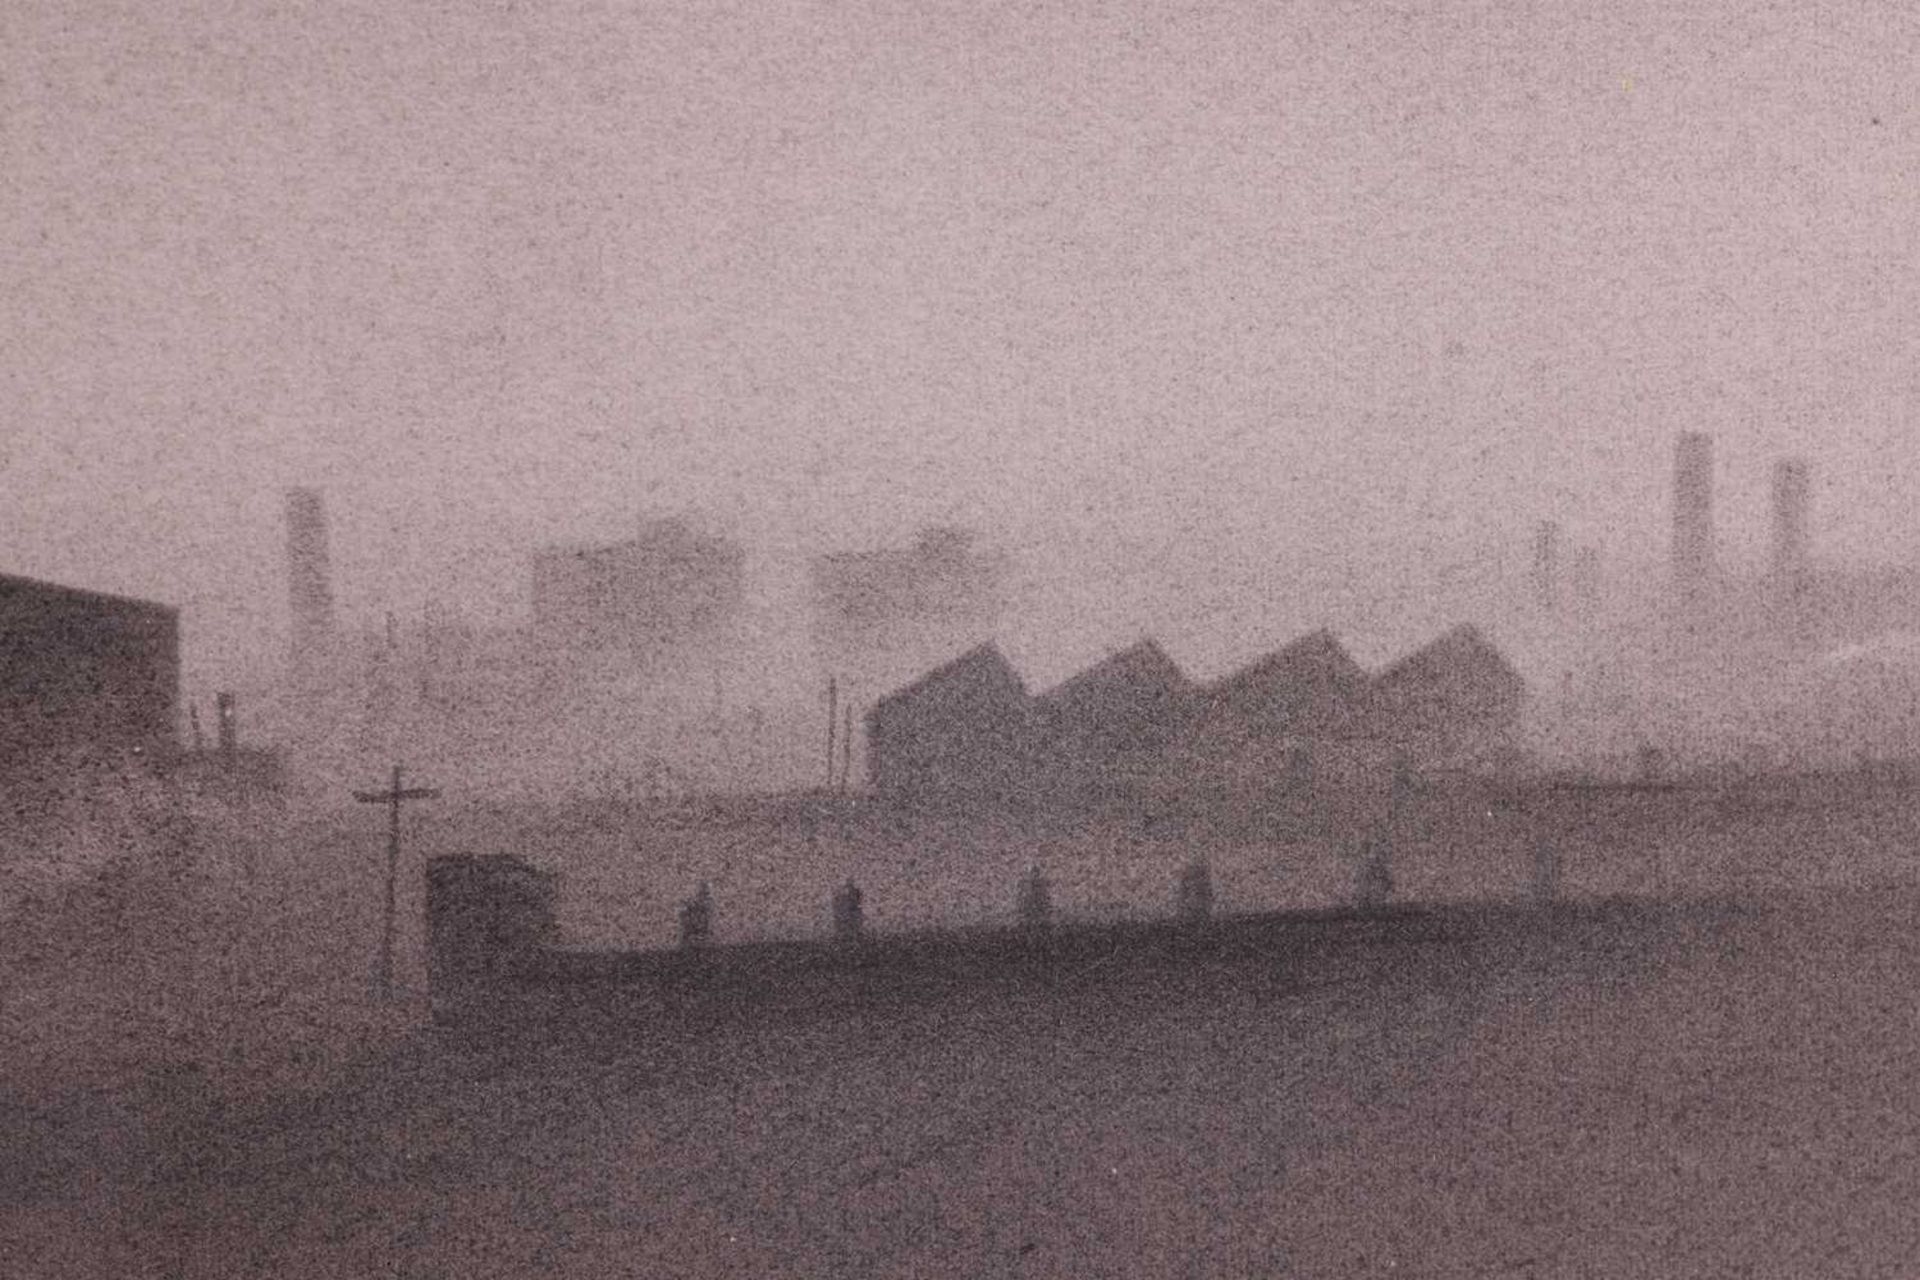 Trevor Grimshaw (1947 - 2001), Northern Industrial Scene, signed and dated 'T. Grimshaw '70' in penc - Image 6 of 12